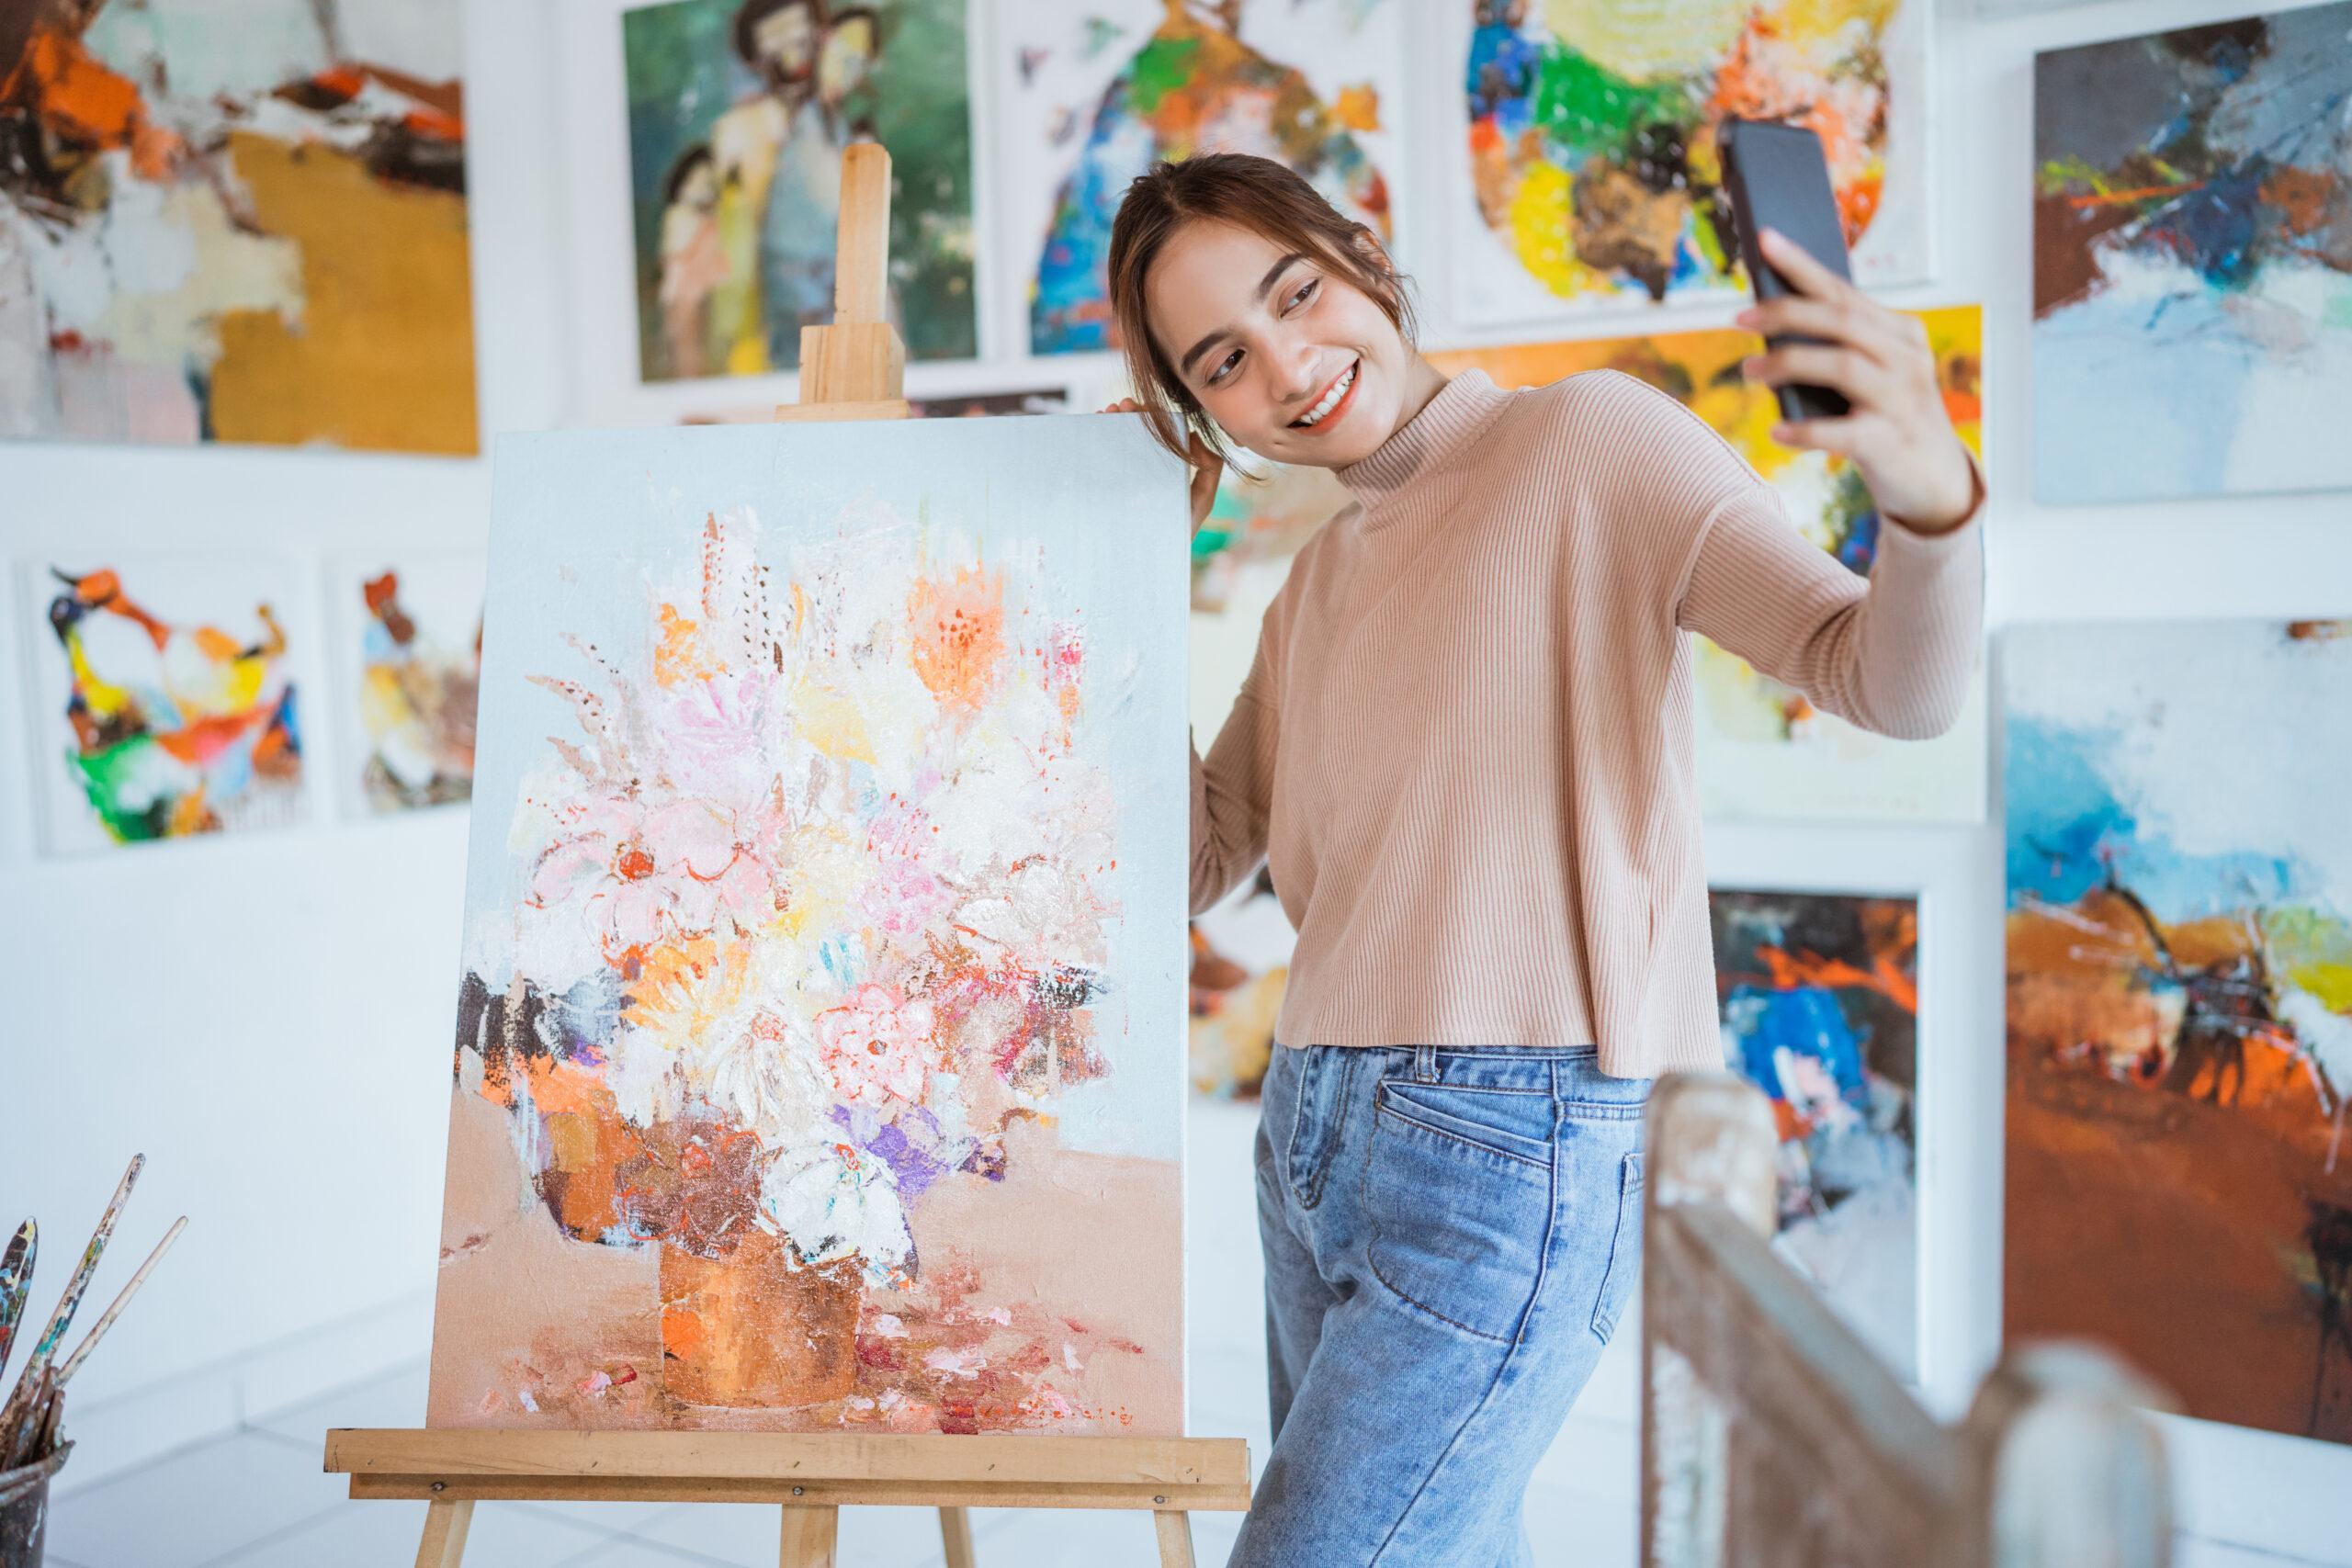 Artist taking a new Instagram selfie with her painting, wondering if she can delete her old photo from an Instagram post.